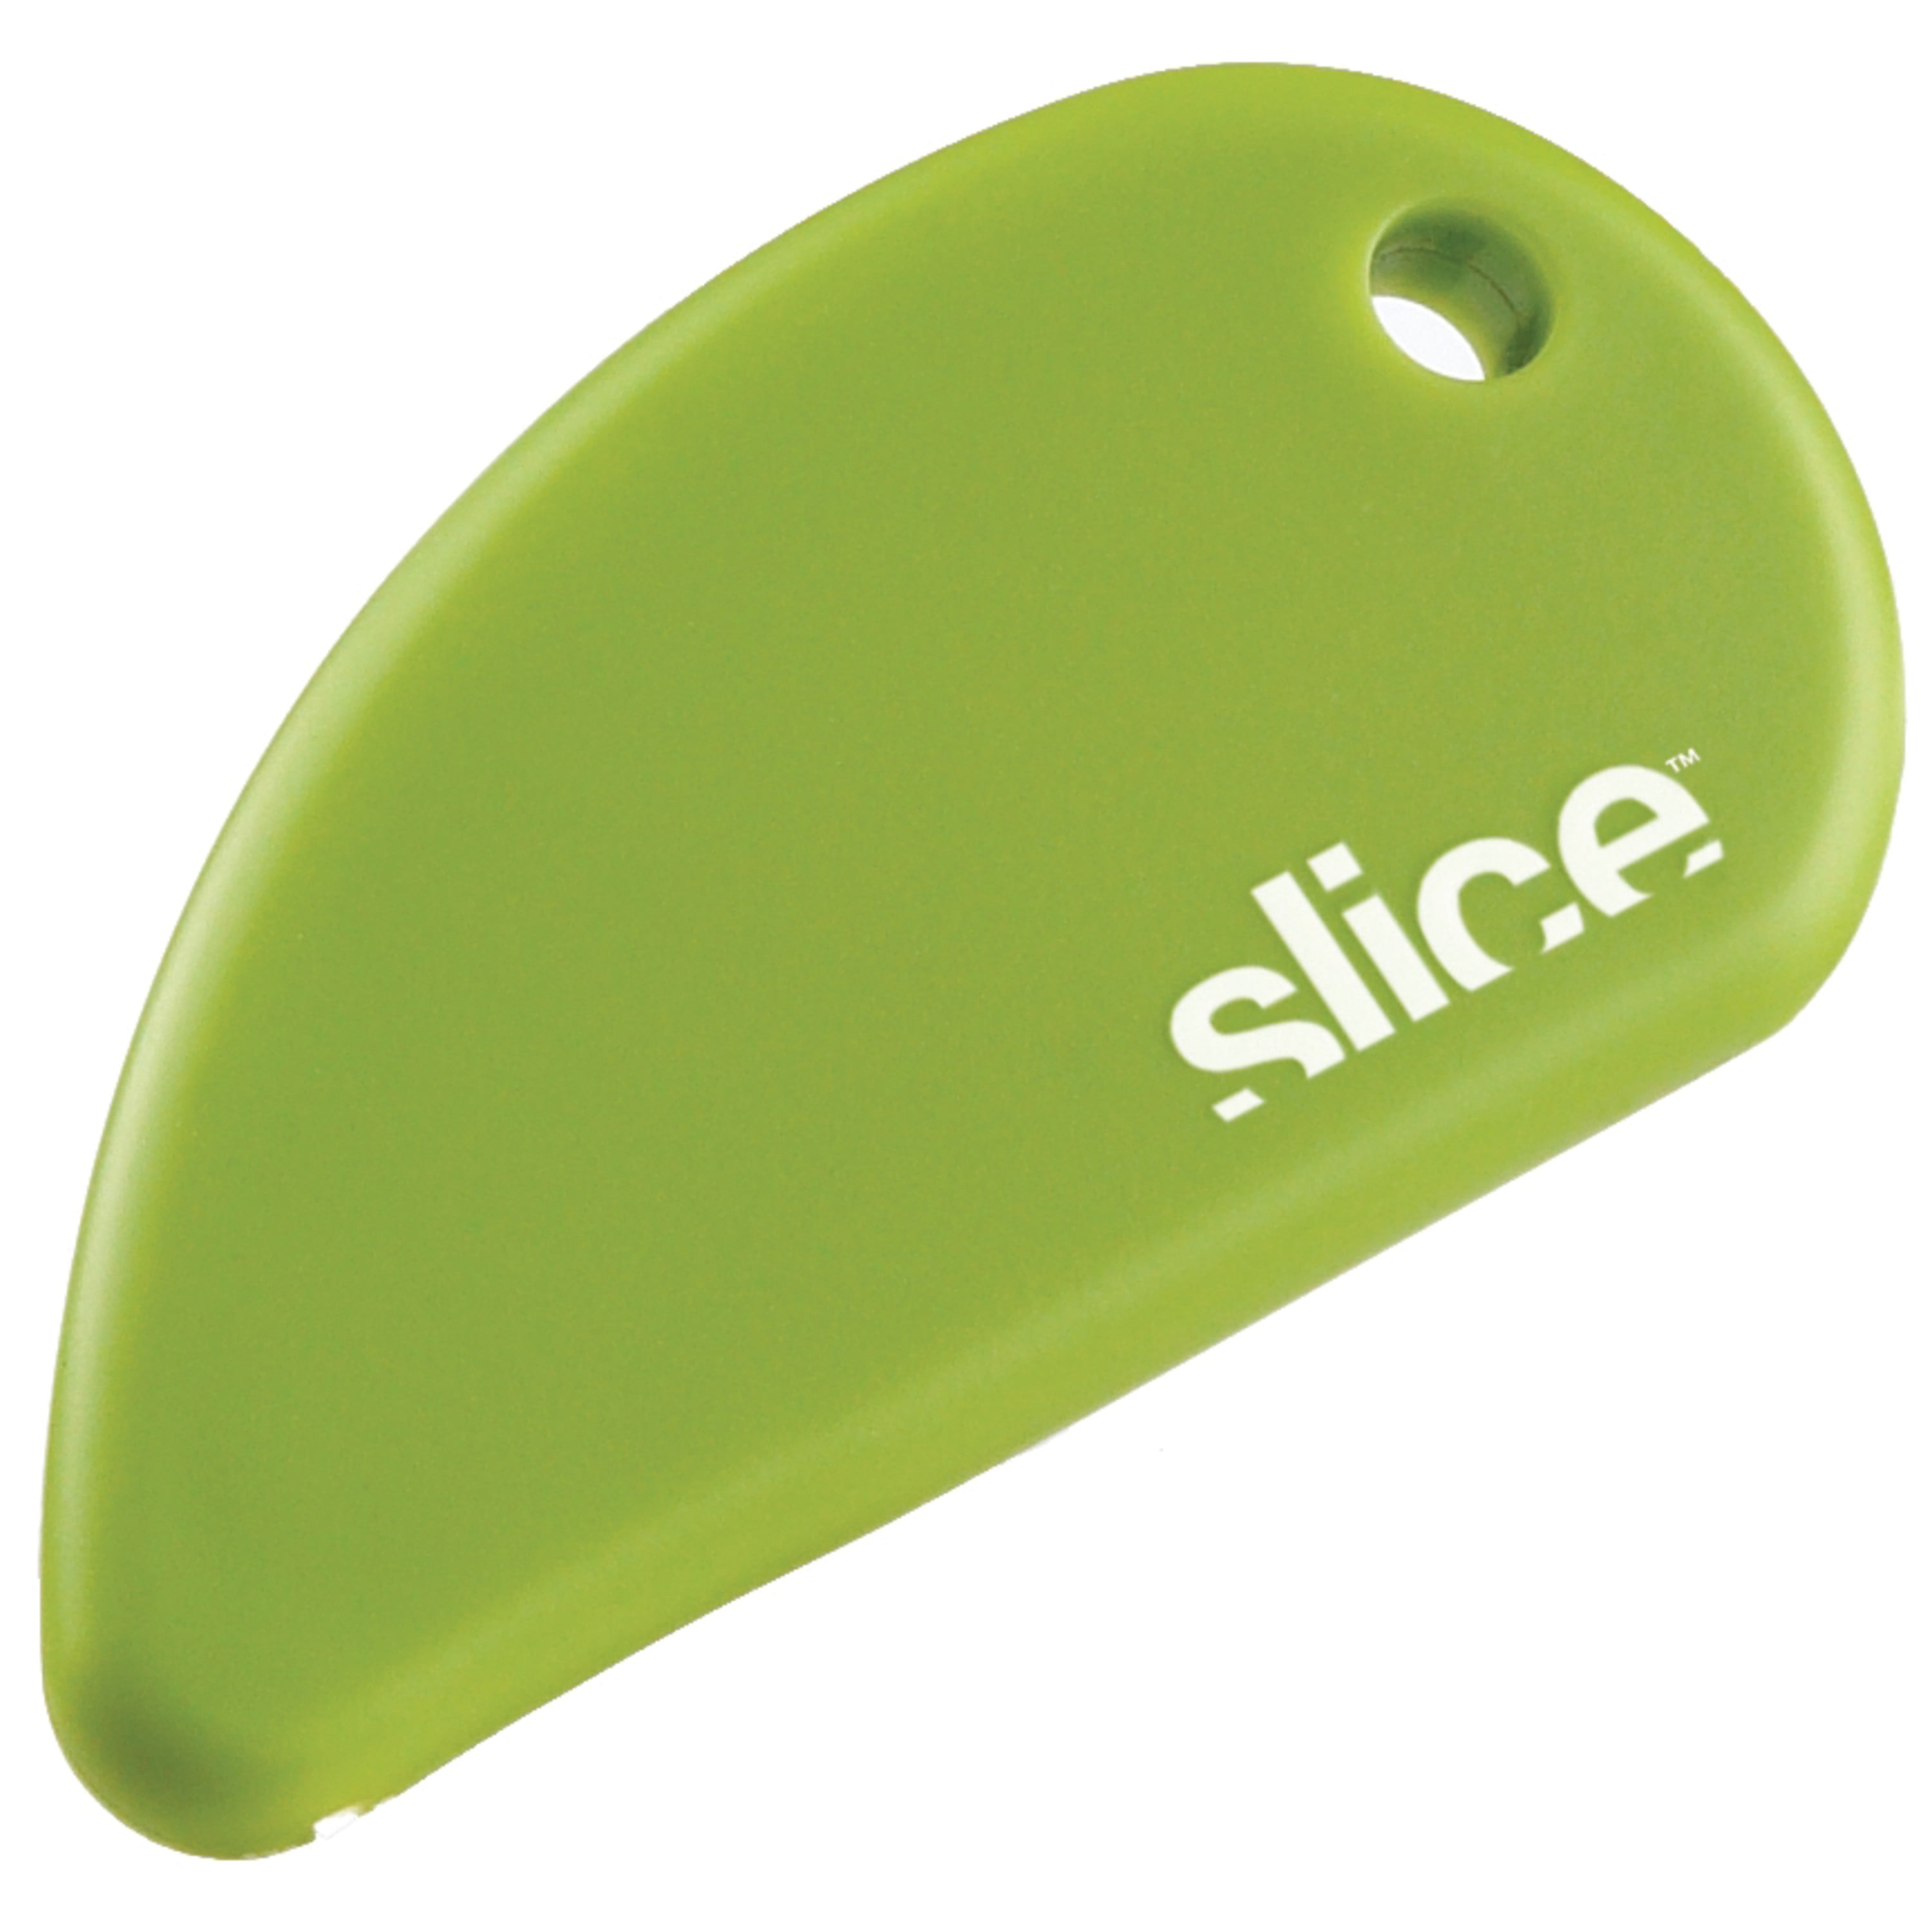 Slice Ceramic Blade, Safety Cutter Finger Friendly, Cuts Blister Packaging,  Paper & Ideal for Outline Trims of Shapes or Coupons, 1 Pack, Green 